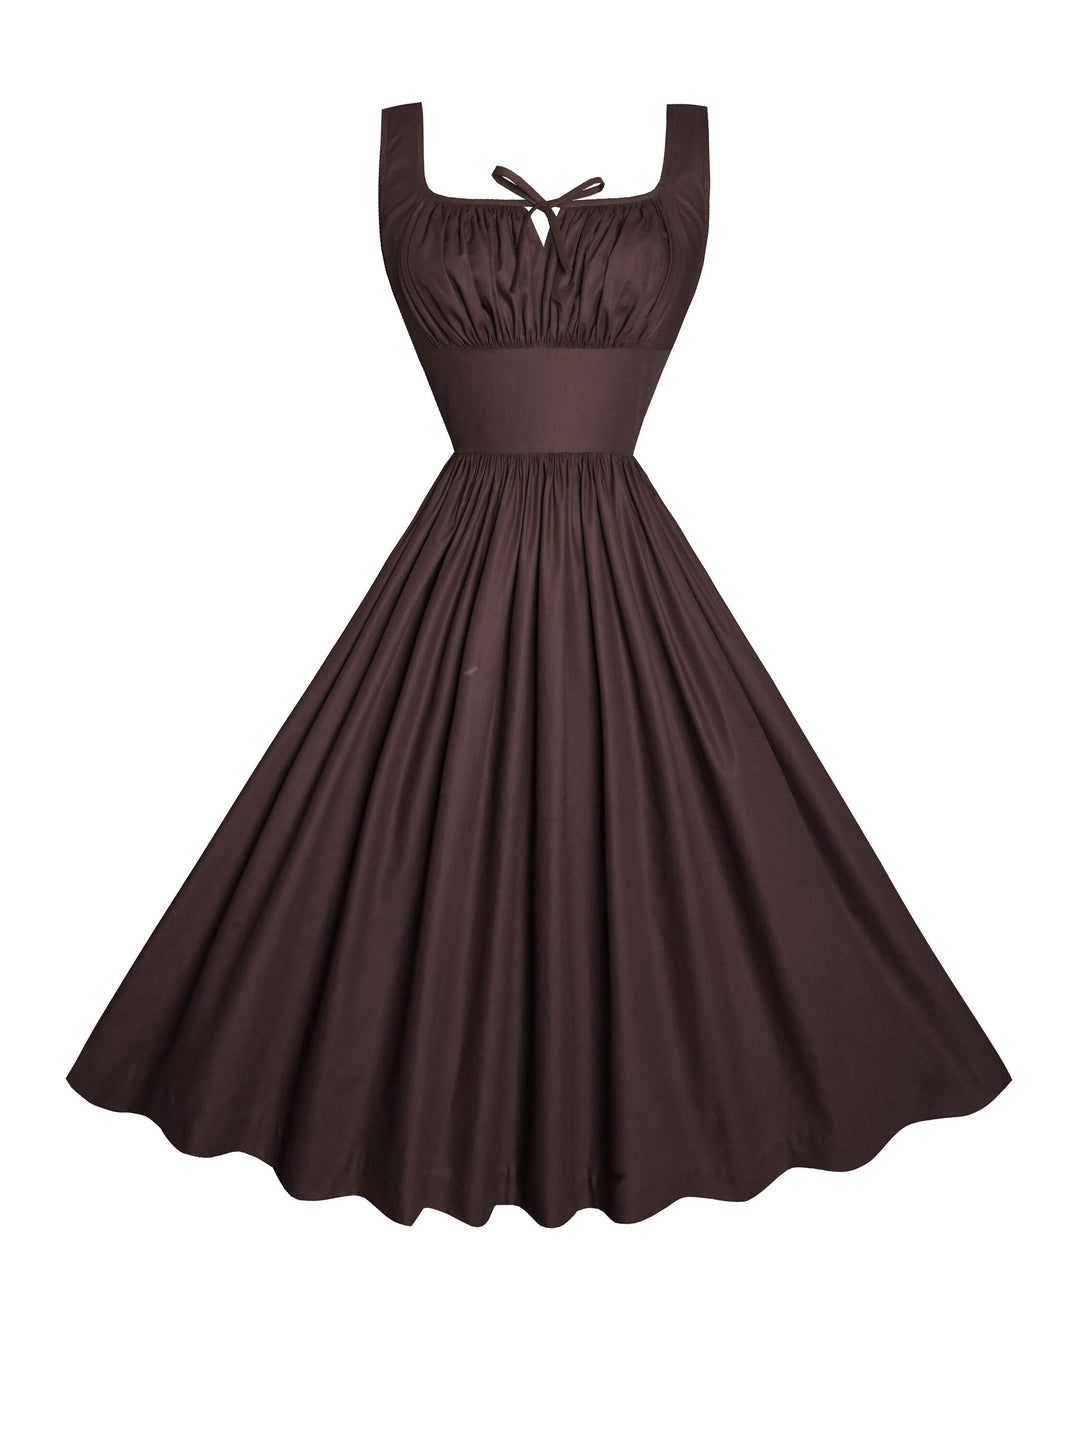 MTO - Michelle Dress in Hickory Brown Cotton